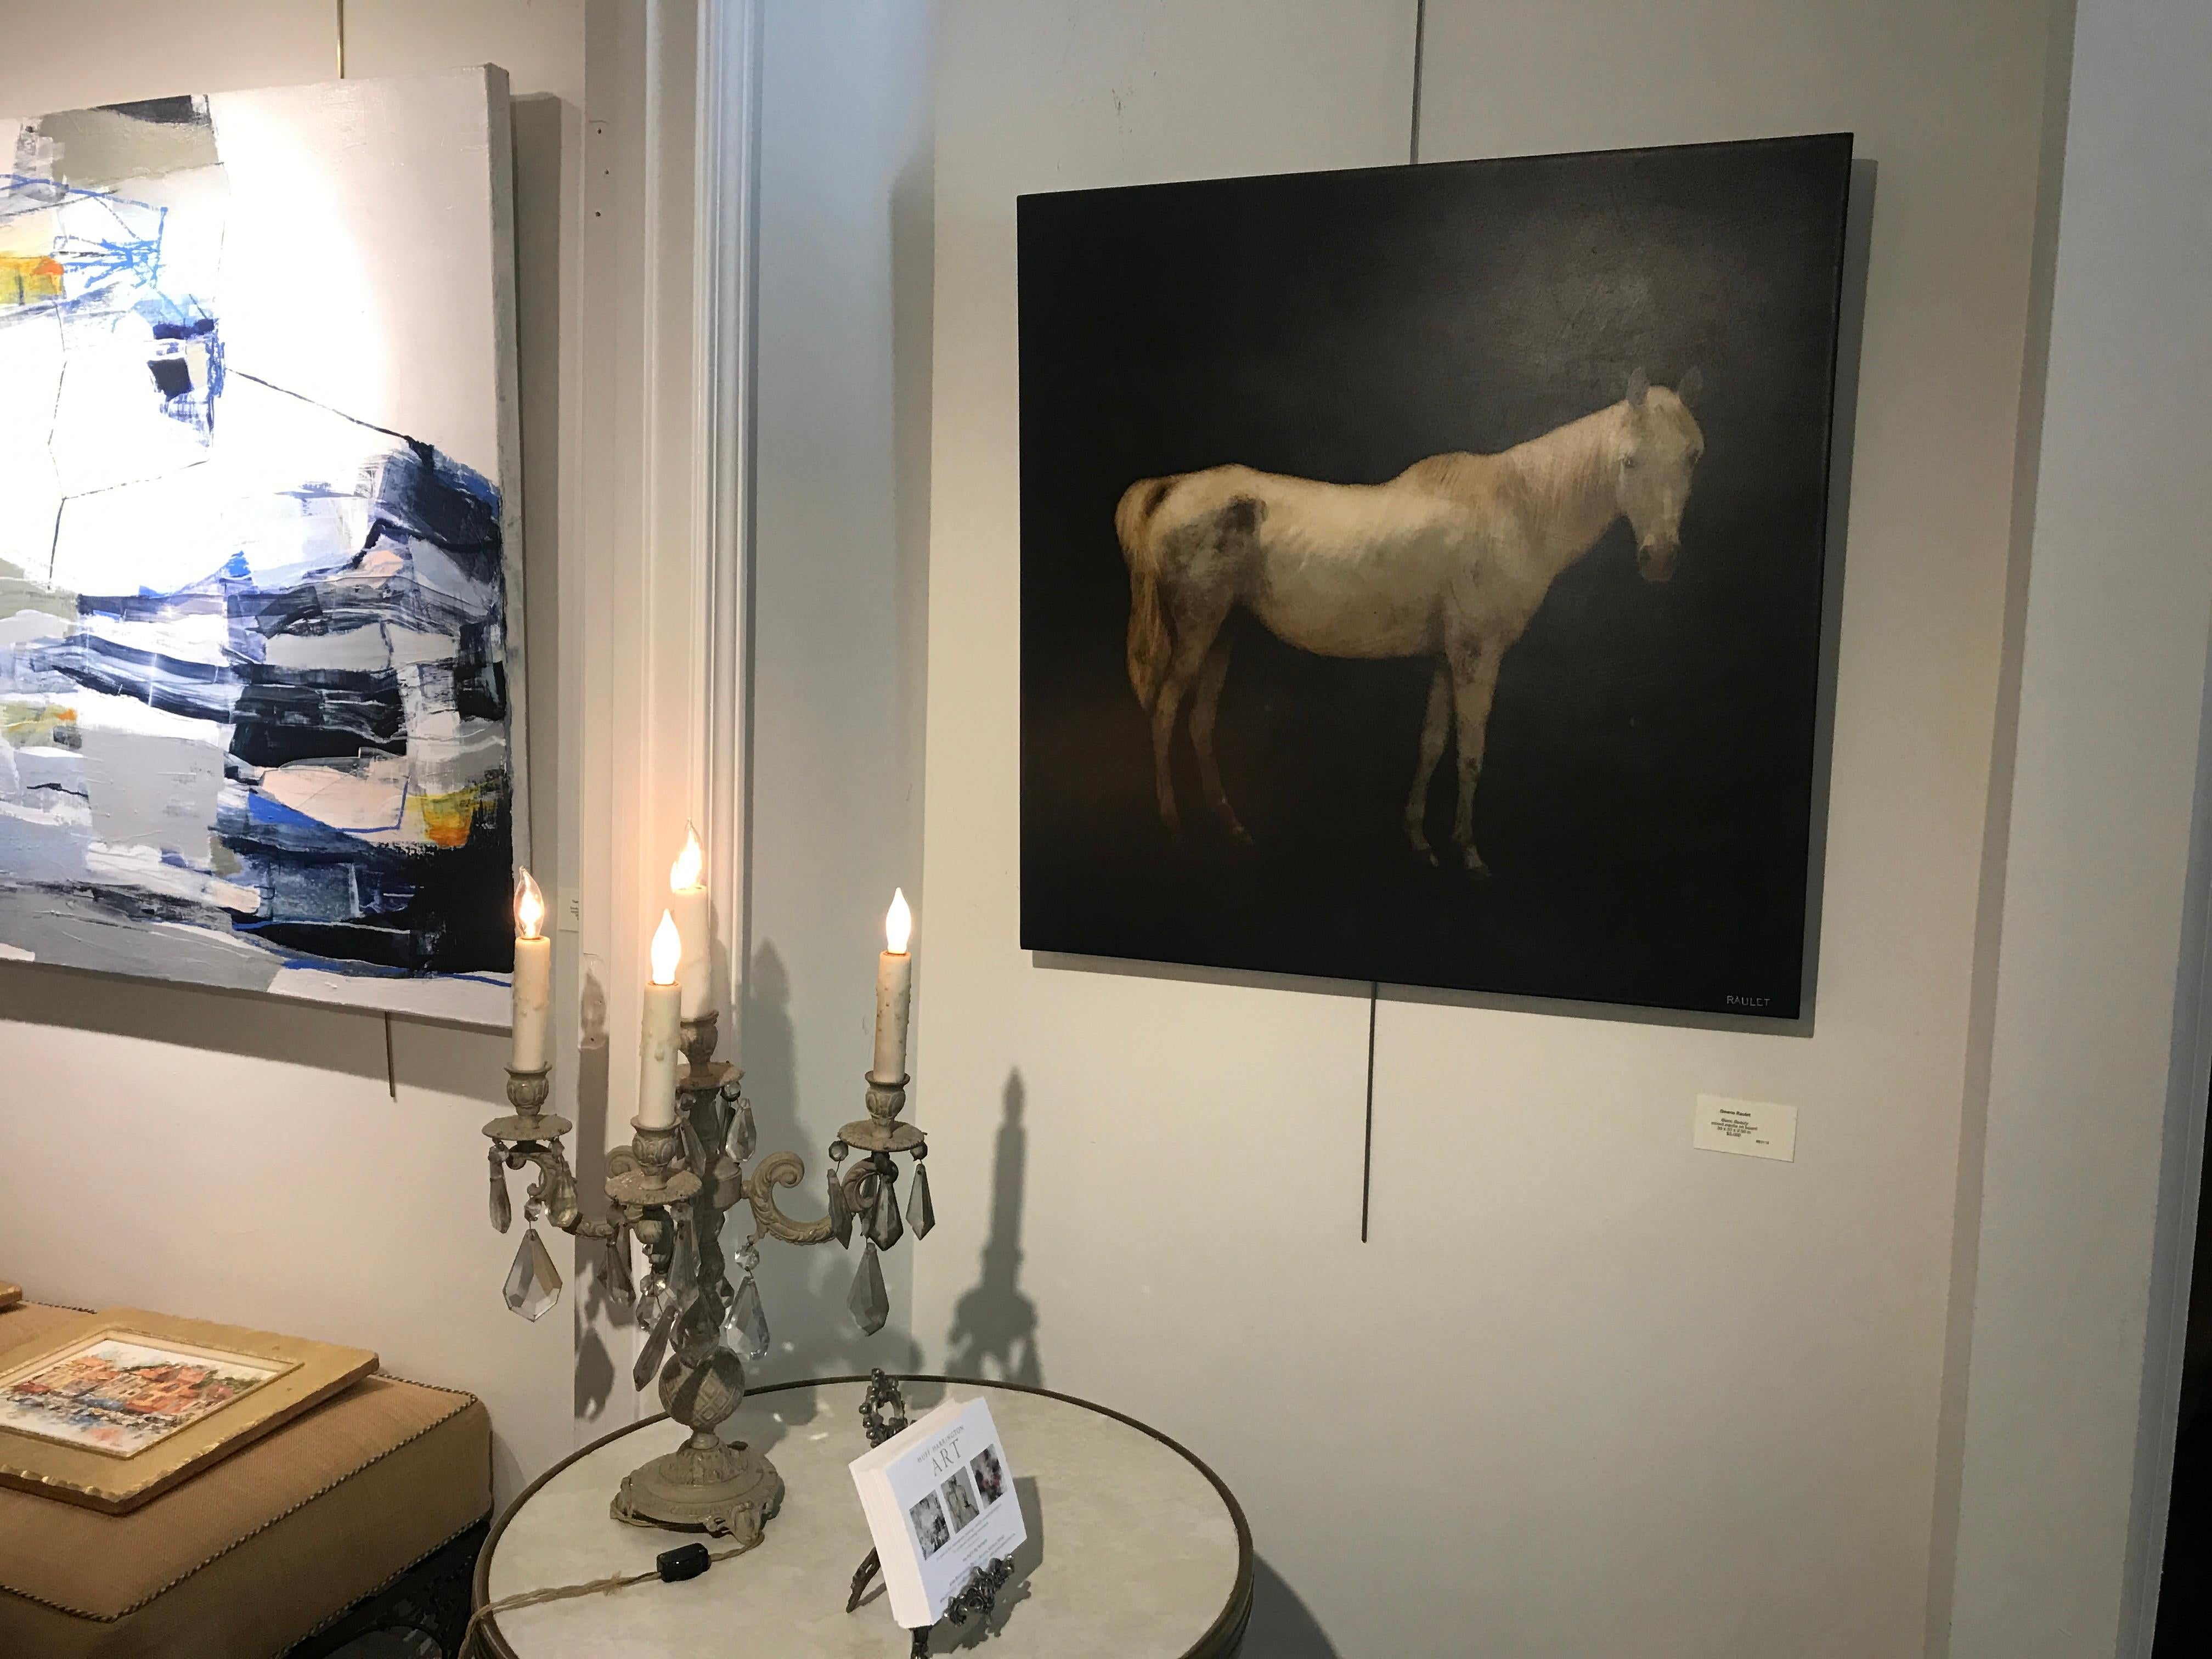 'Blanc Beauty' is a 2018 figurative mixed media on board horse painting created by American artist Dawne Raulet. Featuring a dark background allowing the subject to capture the entirety of the light, the painting depicts a white horse seen from the